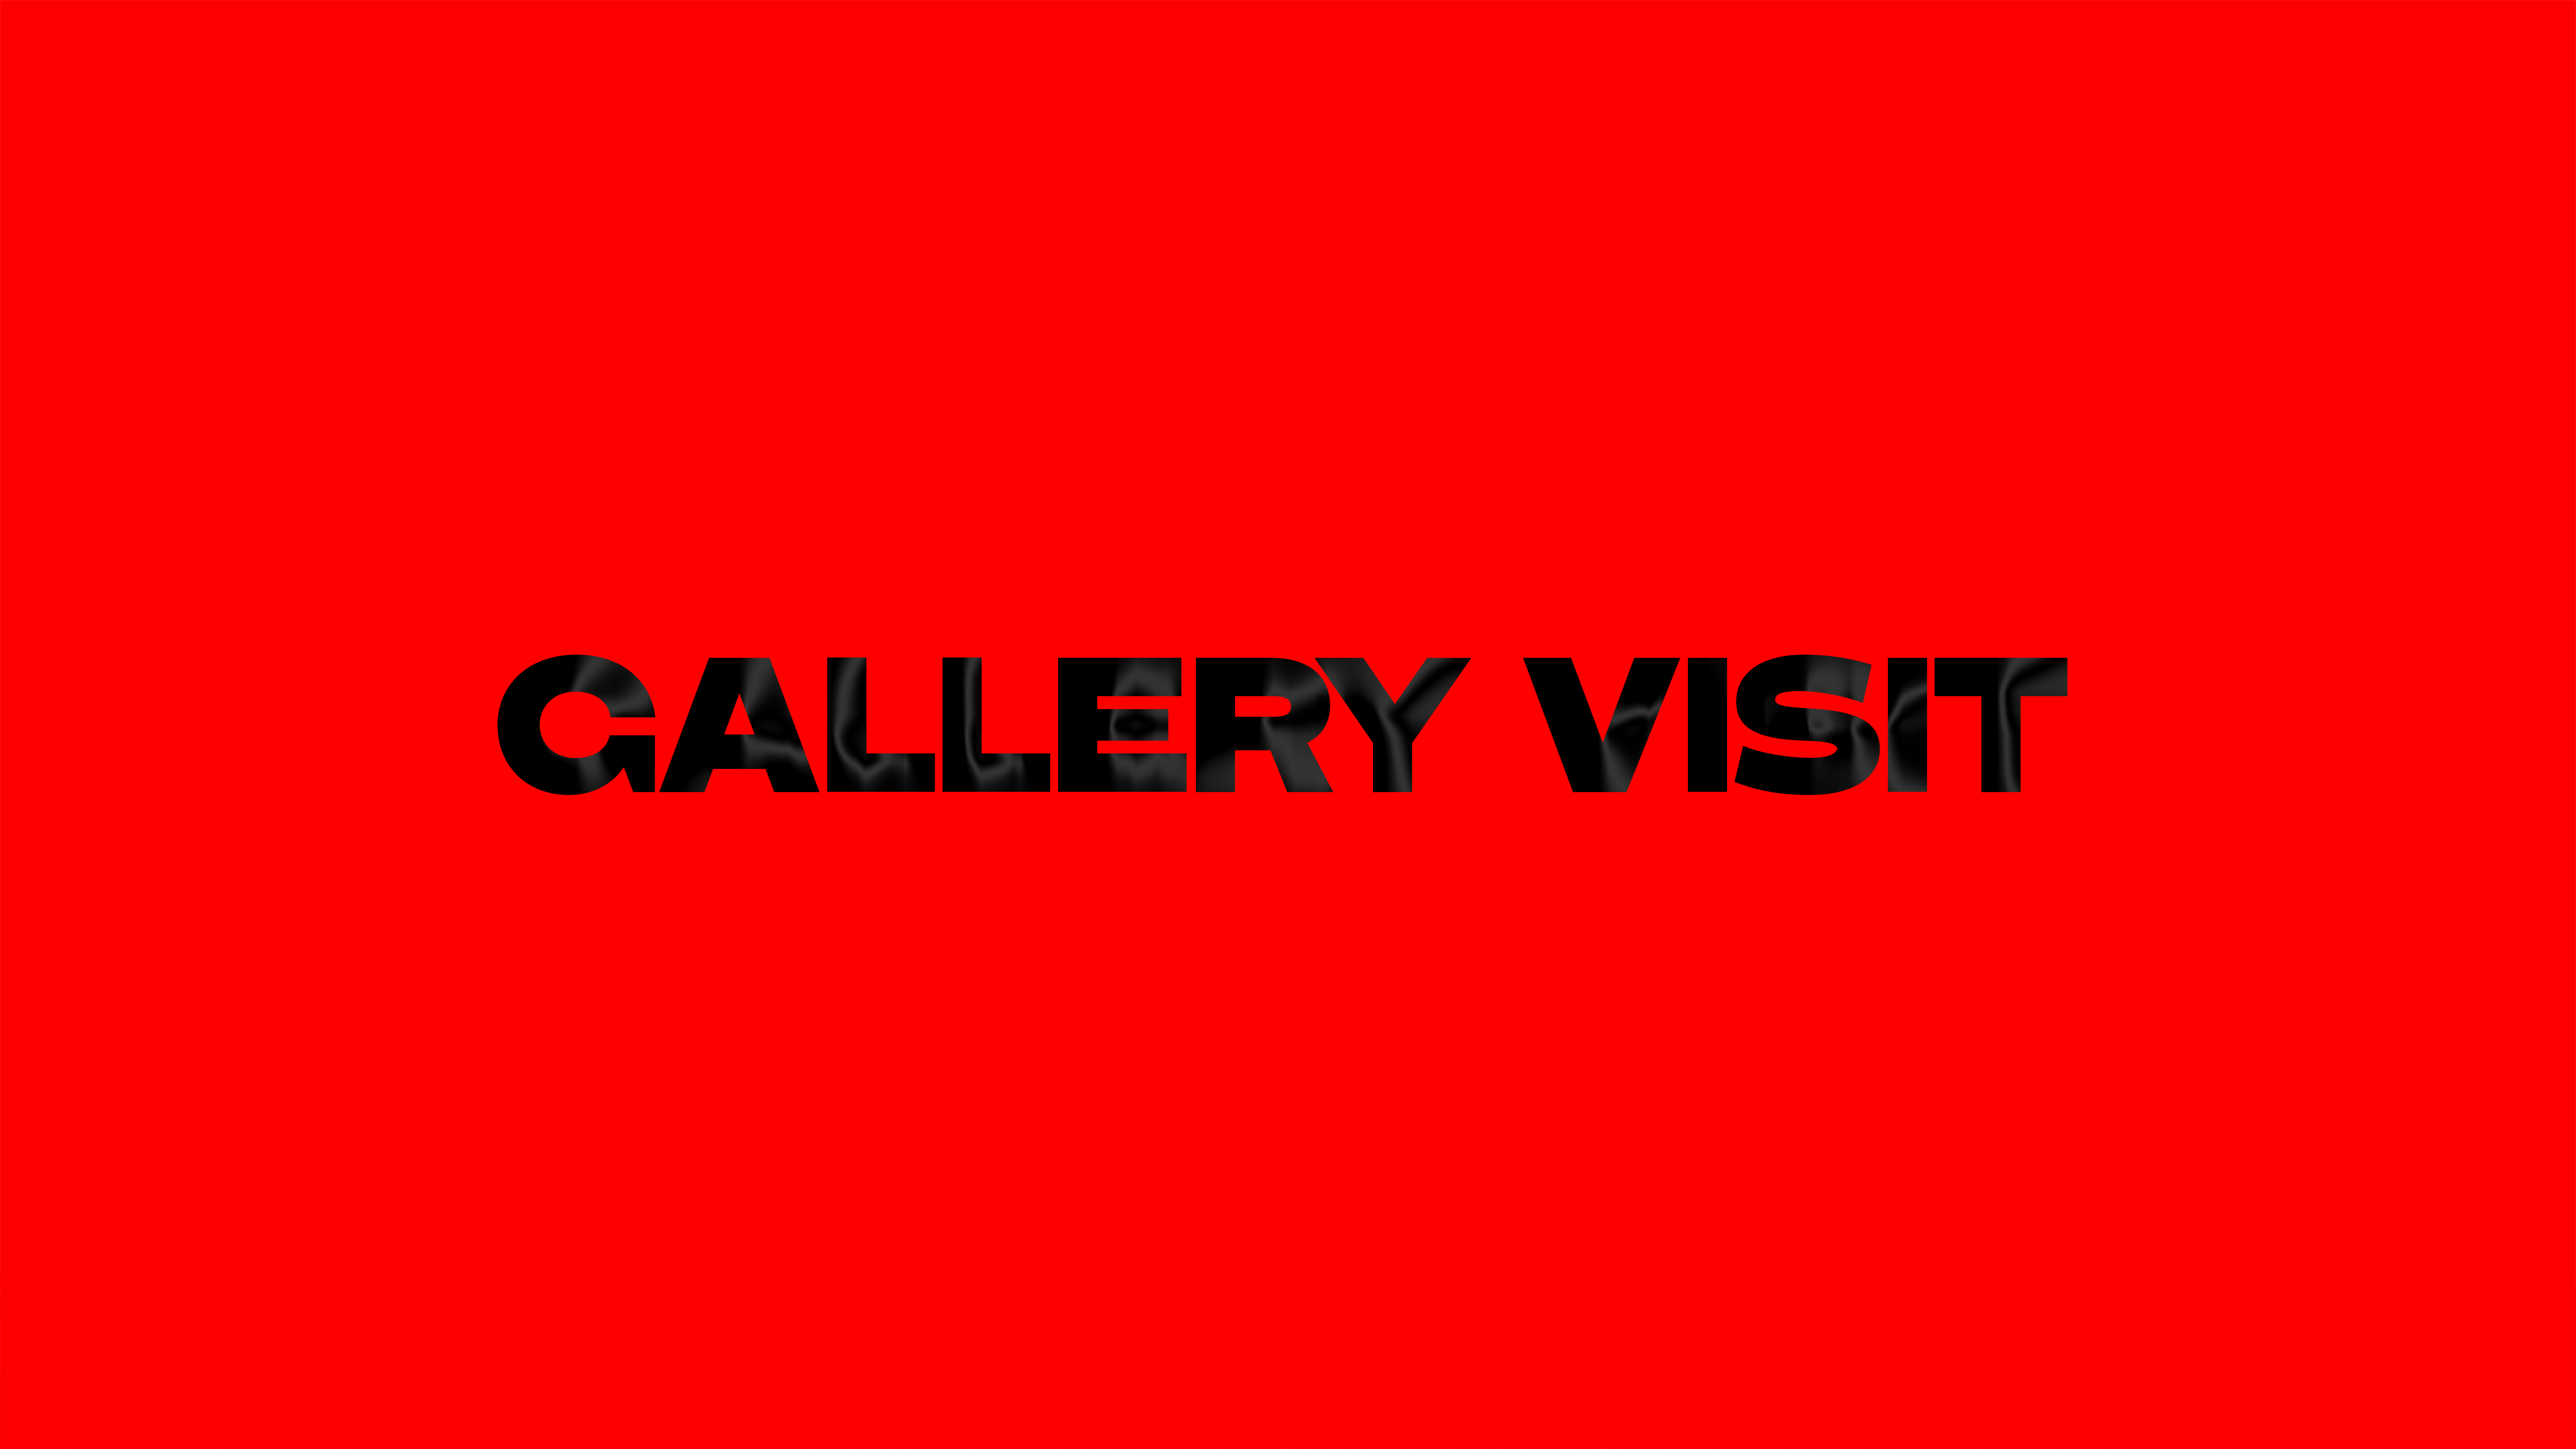 gallery visit text written in black on red background